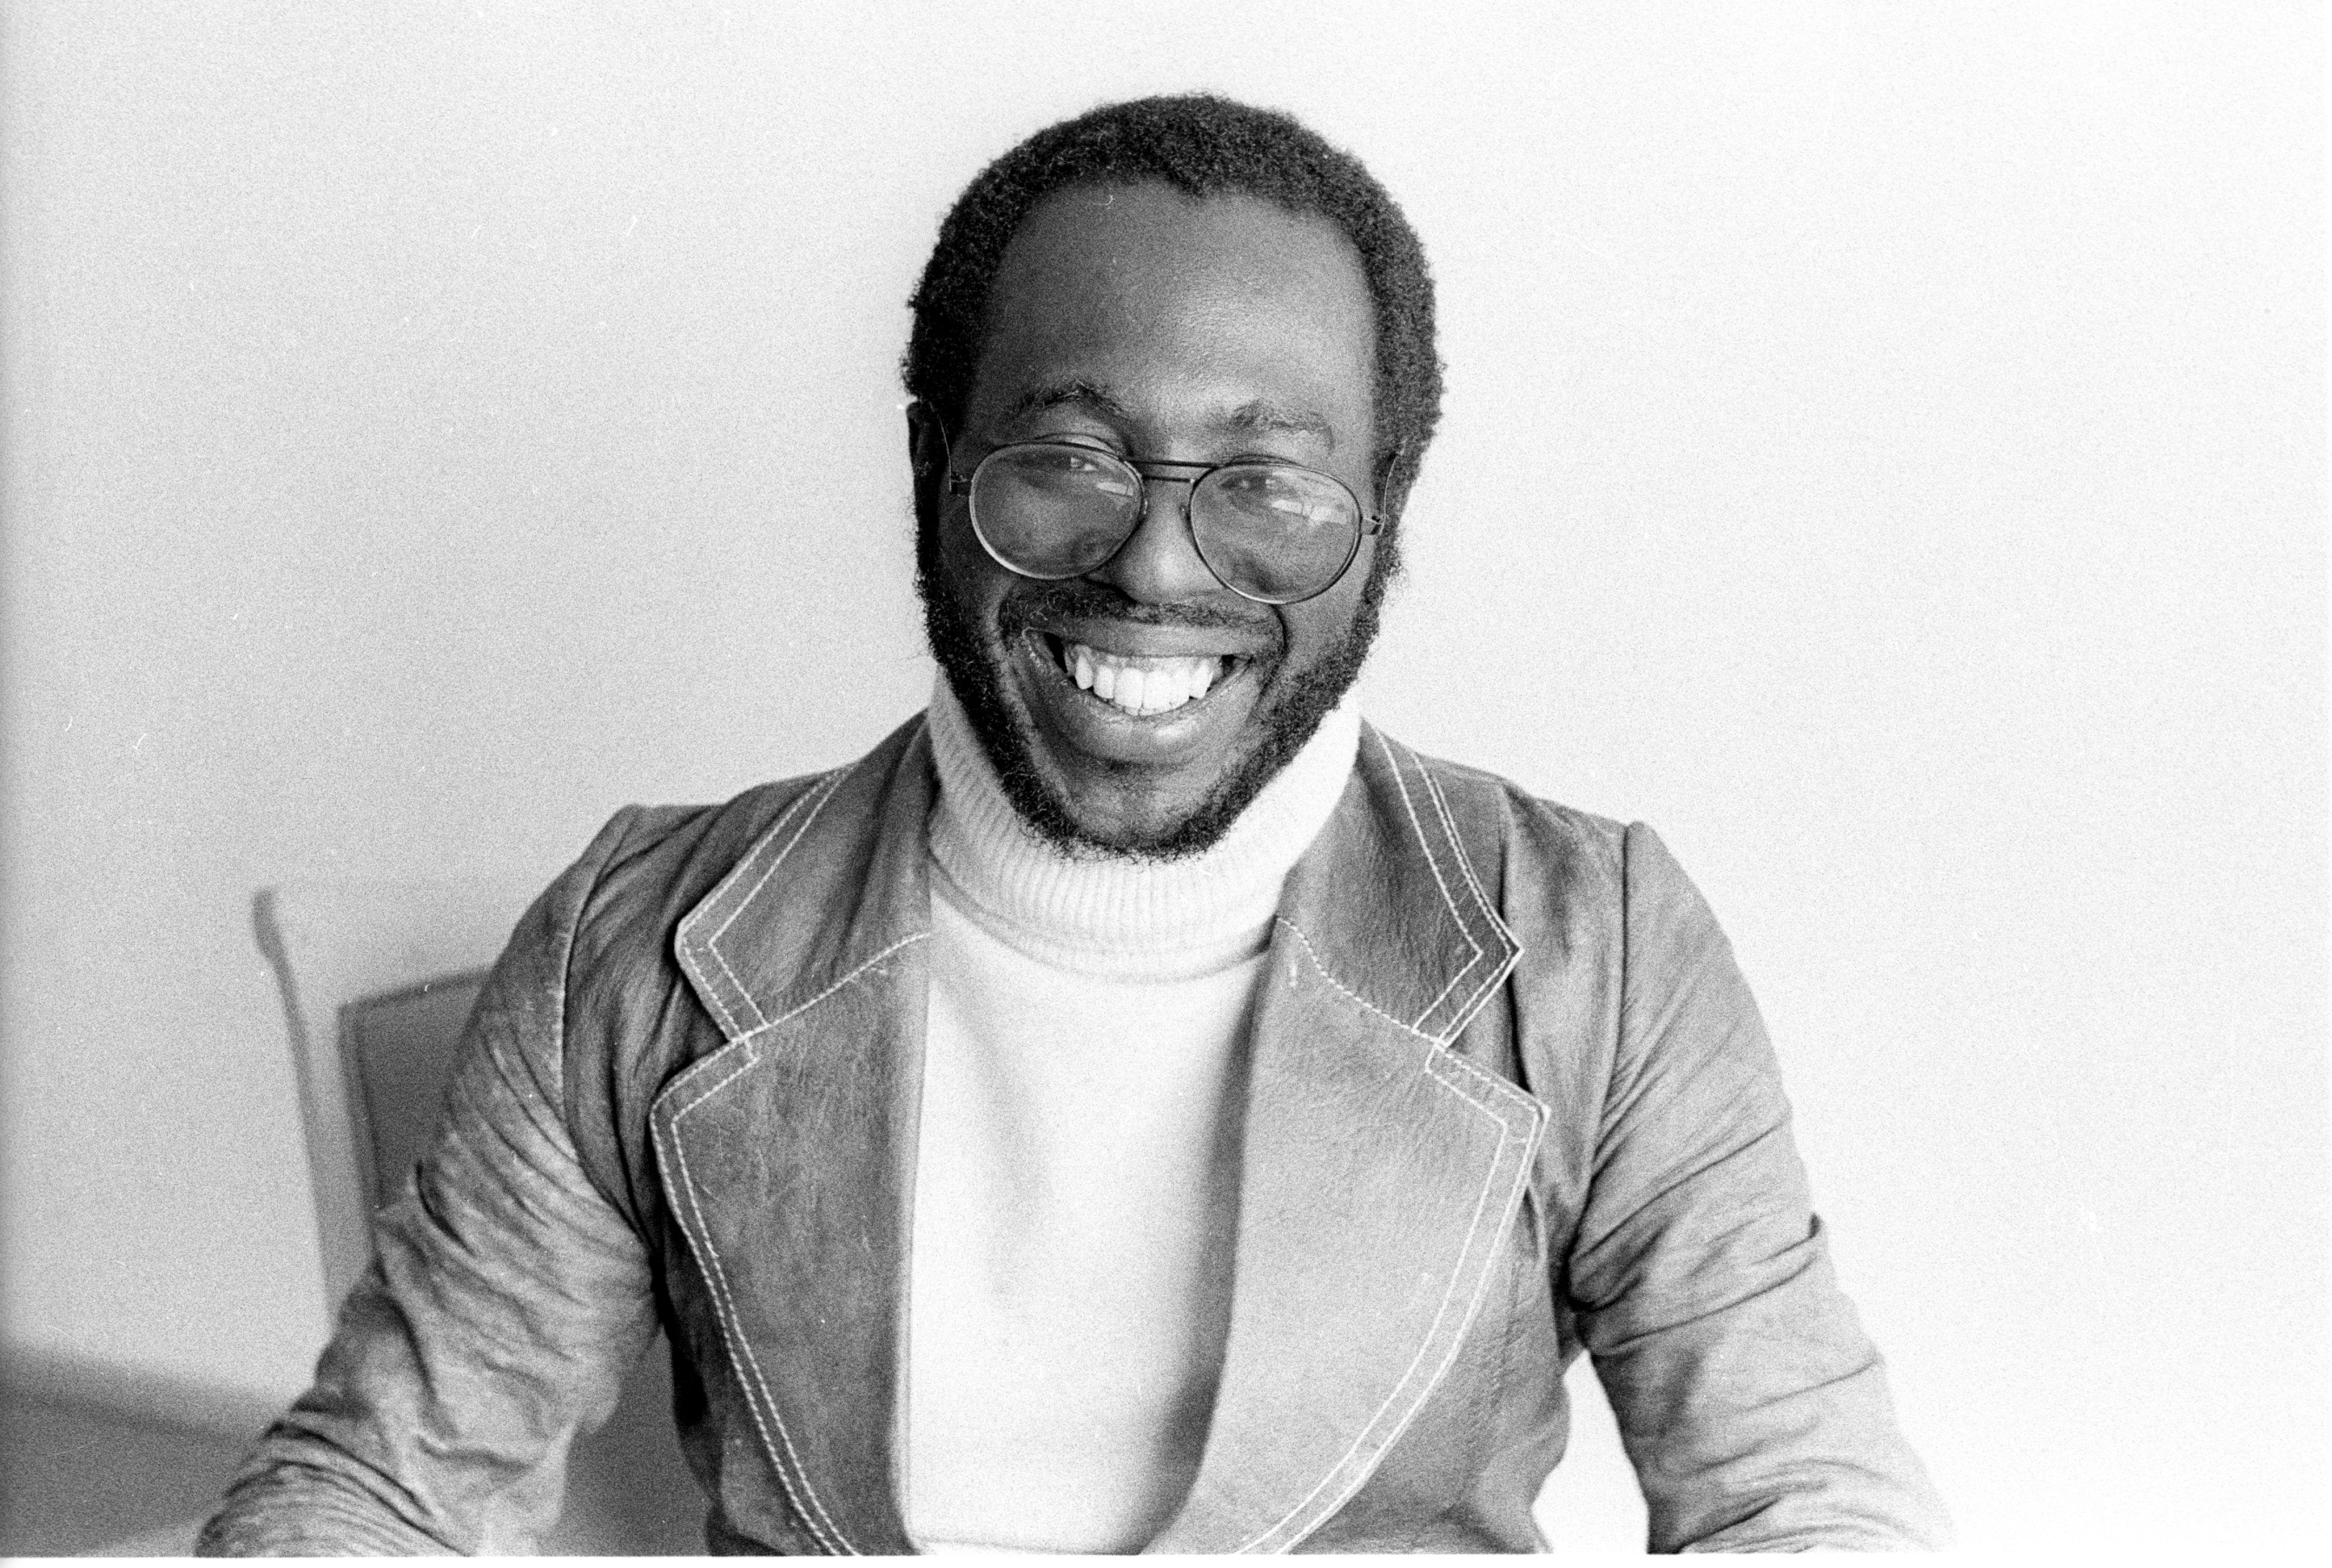 Black and white promotional photo of R&B singer Curtis Mayfield, unknown date | Photo: Getty Images